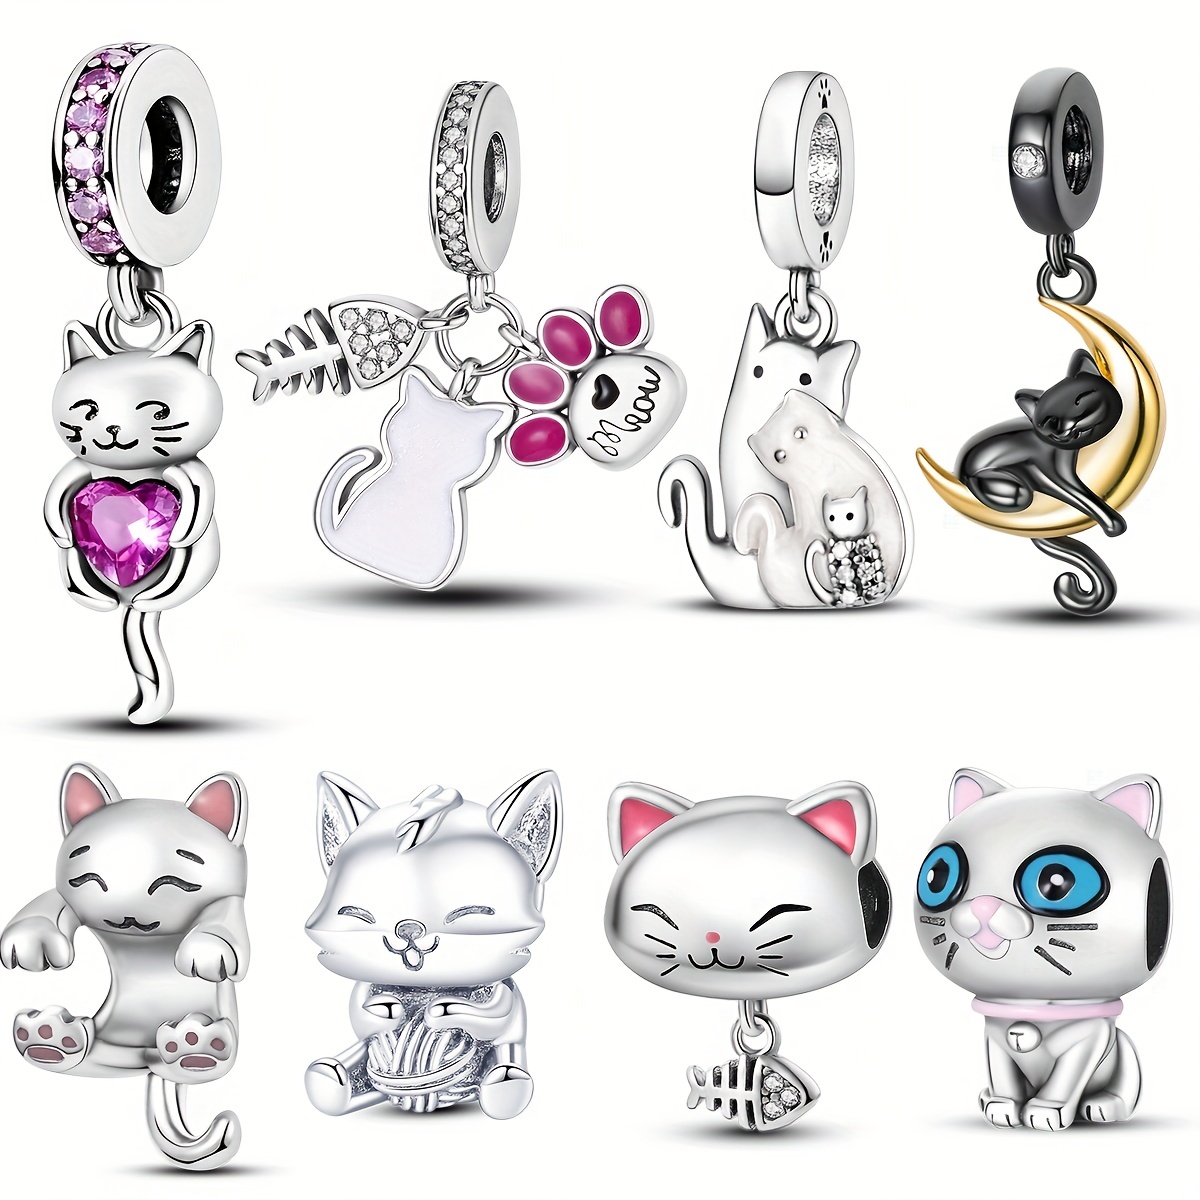 BENBO 16 Pcs Cat Charms for Jewelry Making, Colorful Acrylic Cat Charms  Pendants Cute Mini Kitty Pendant Animal Charm Bulk with Box for DIY  Bracelets